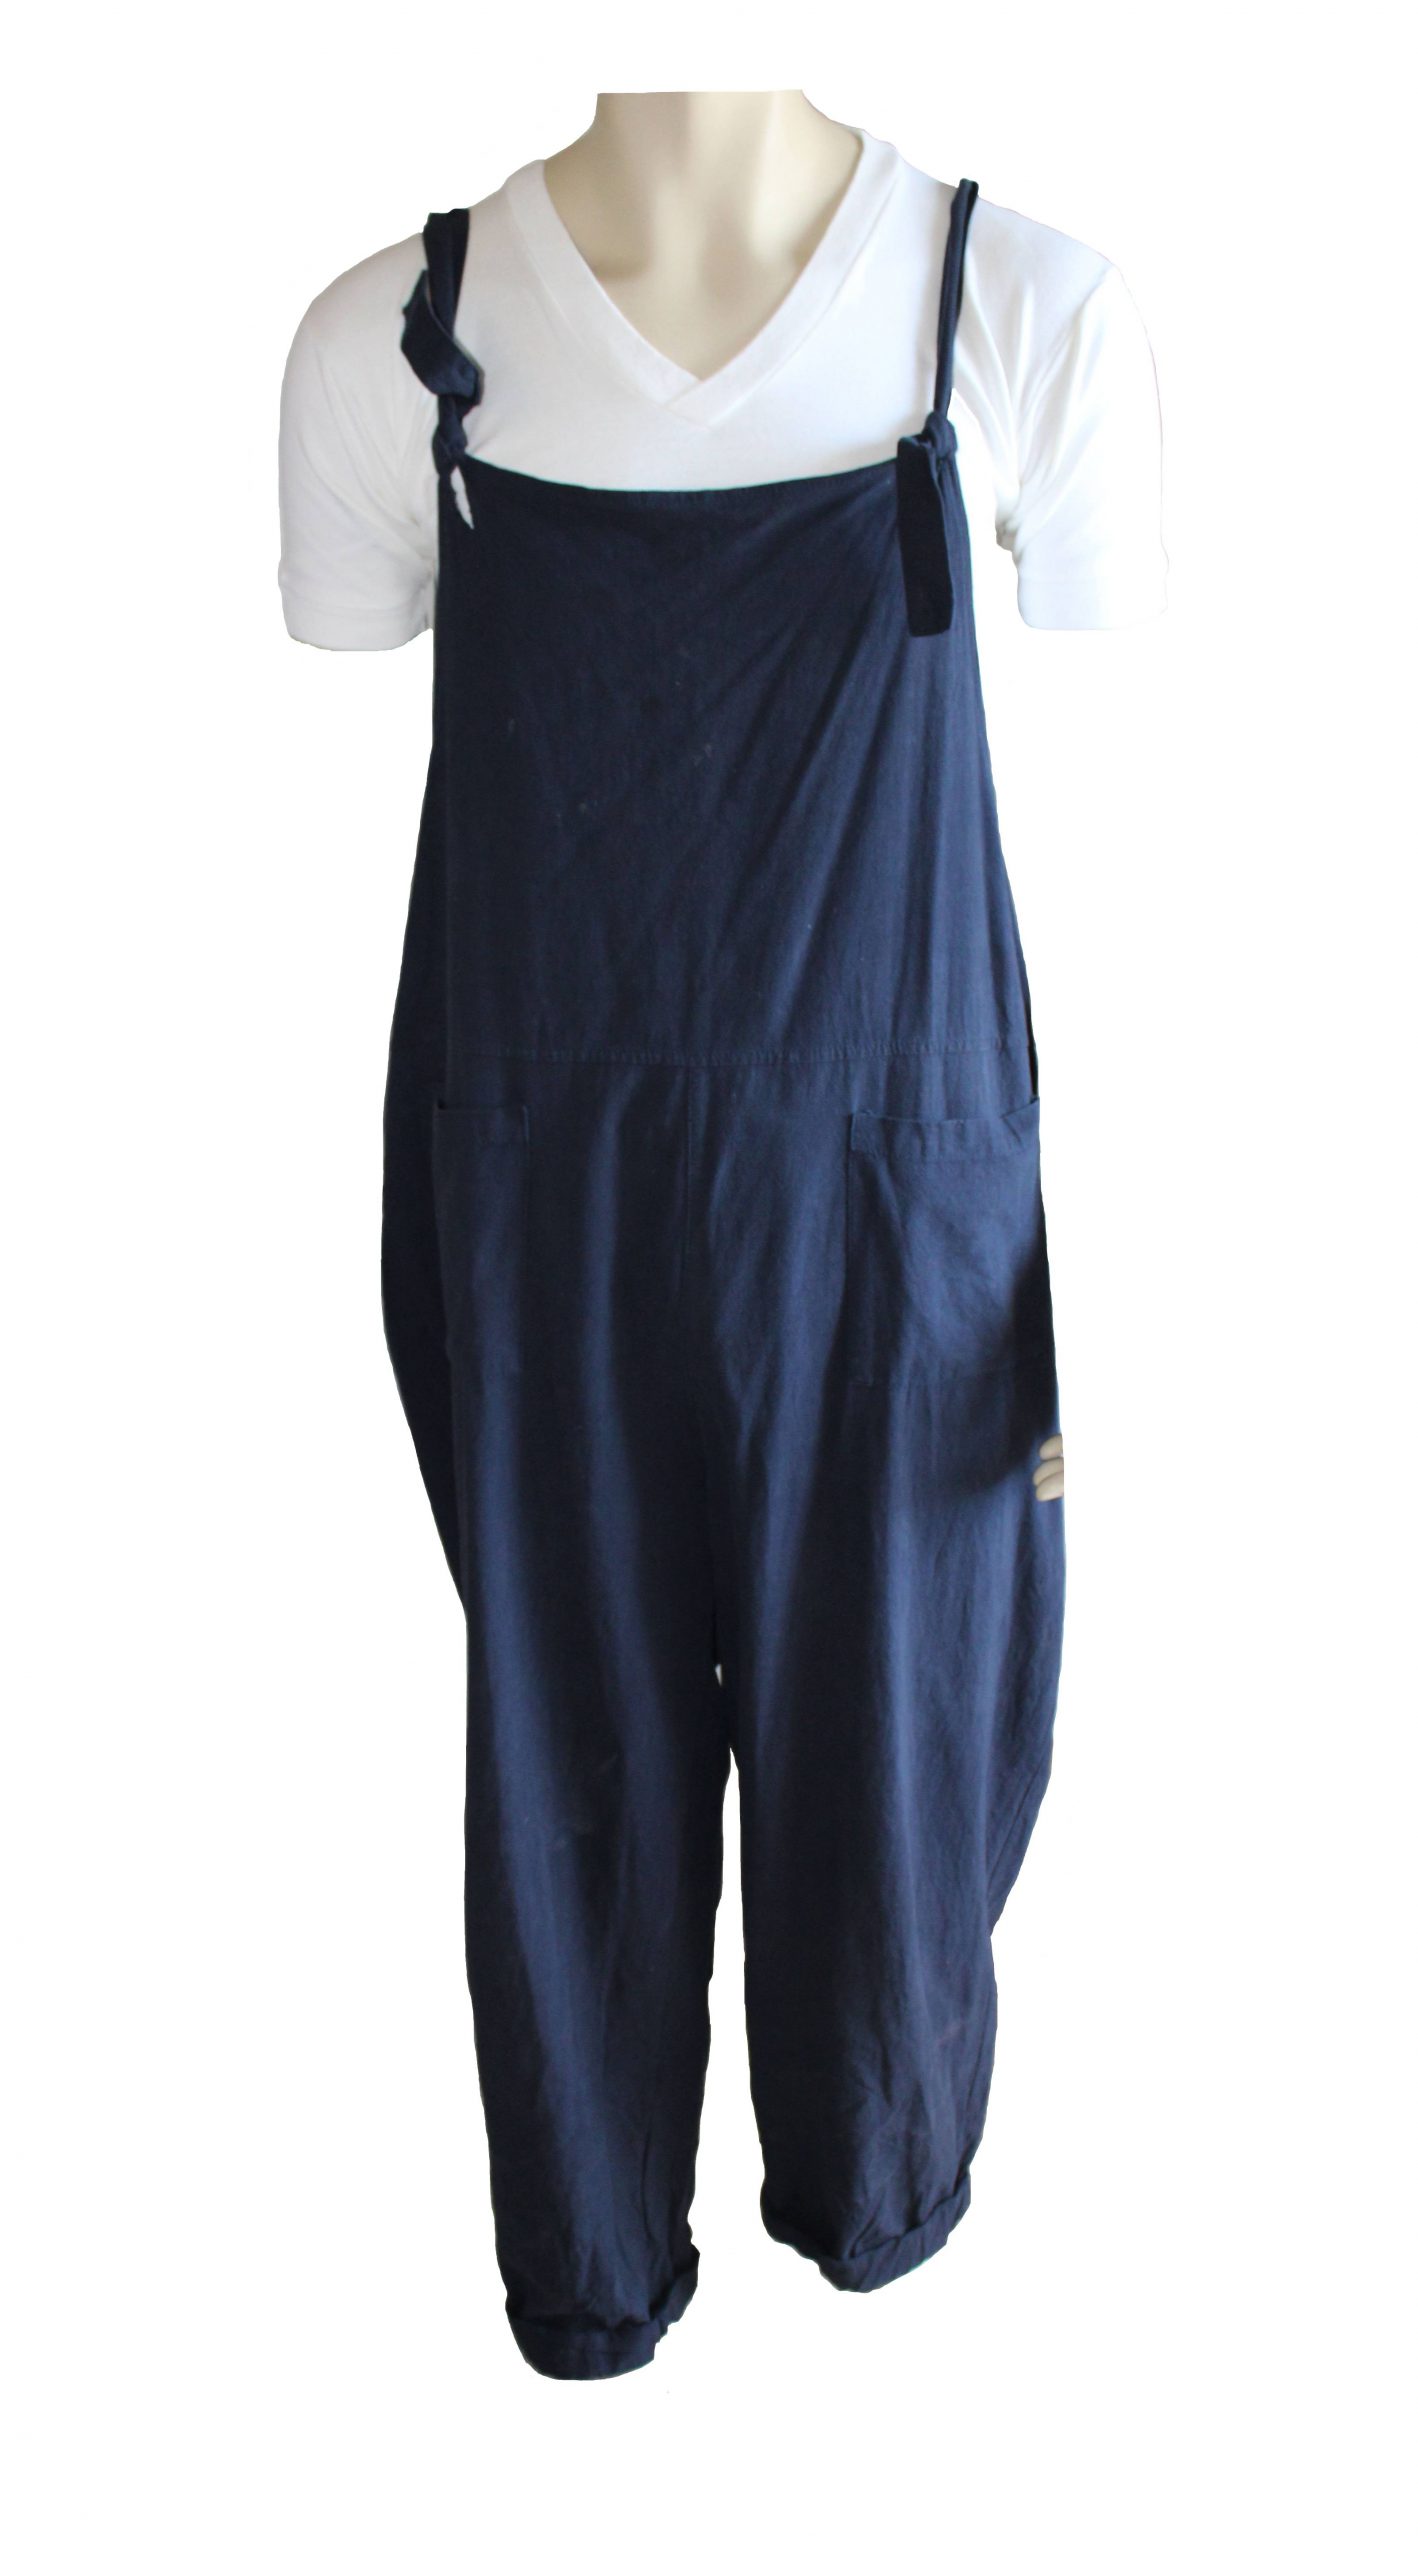 Dark blue dungarees over a white t-shirt